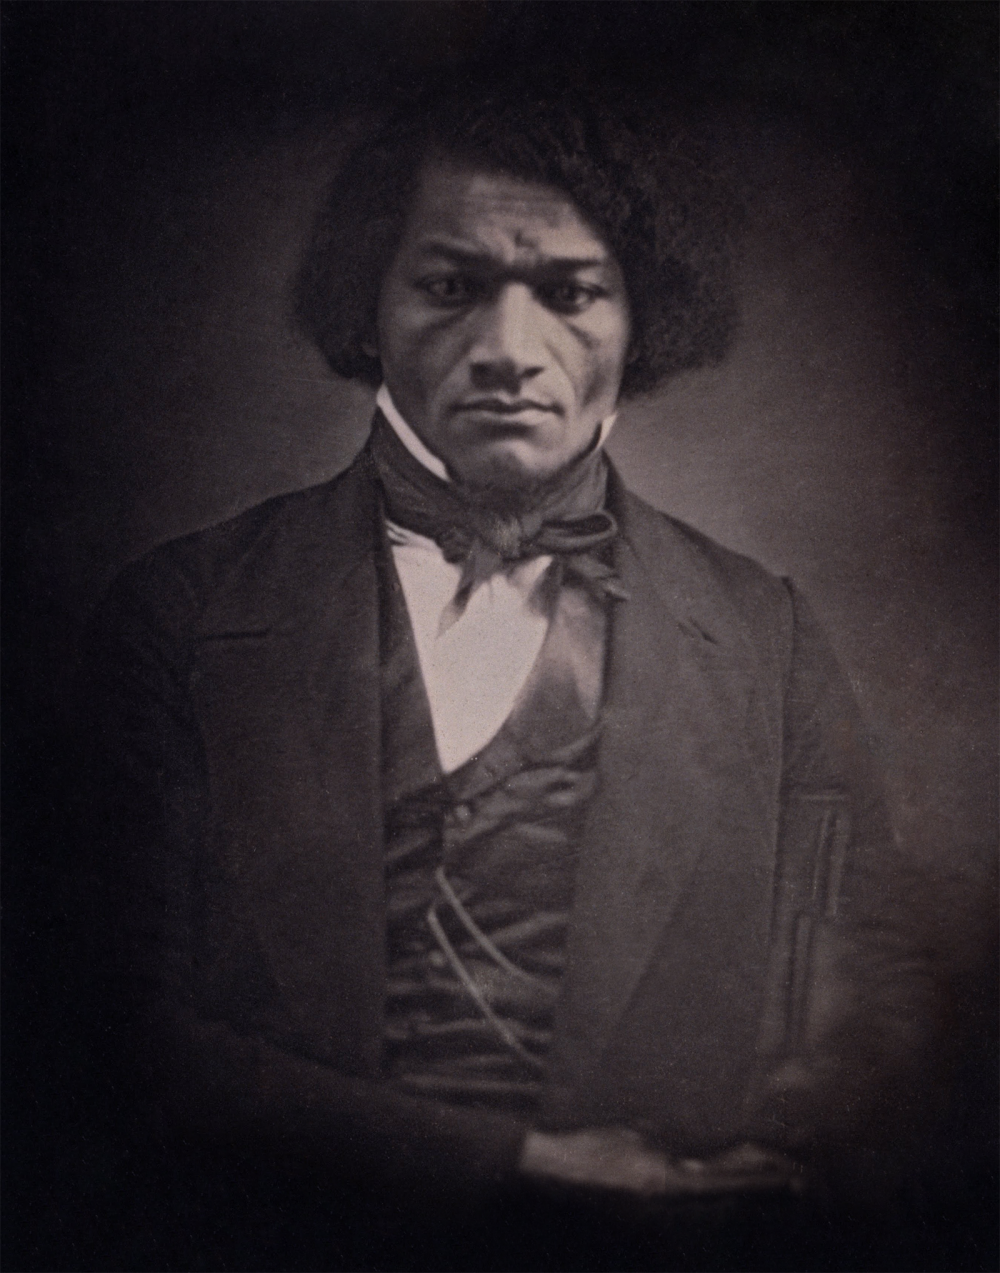 Frederick Douglass was perhaps the most famous African American abolitionist, fighting tirelessly not only for the end of slavery but for equal rights of all American citizens. This copy of a daguerreotype shows him as a young man, around the age of 29 and soon after his self-emancipation. Print, c. 1850 after c. 1847 daguerreotype. Wikimedia, http://commons.wikimedia.org/wiki/File:Unidentified_Artist_-_Frederick_Douglass_-_Google_Art_Project-restore.png. 